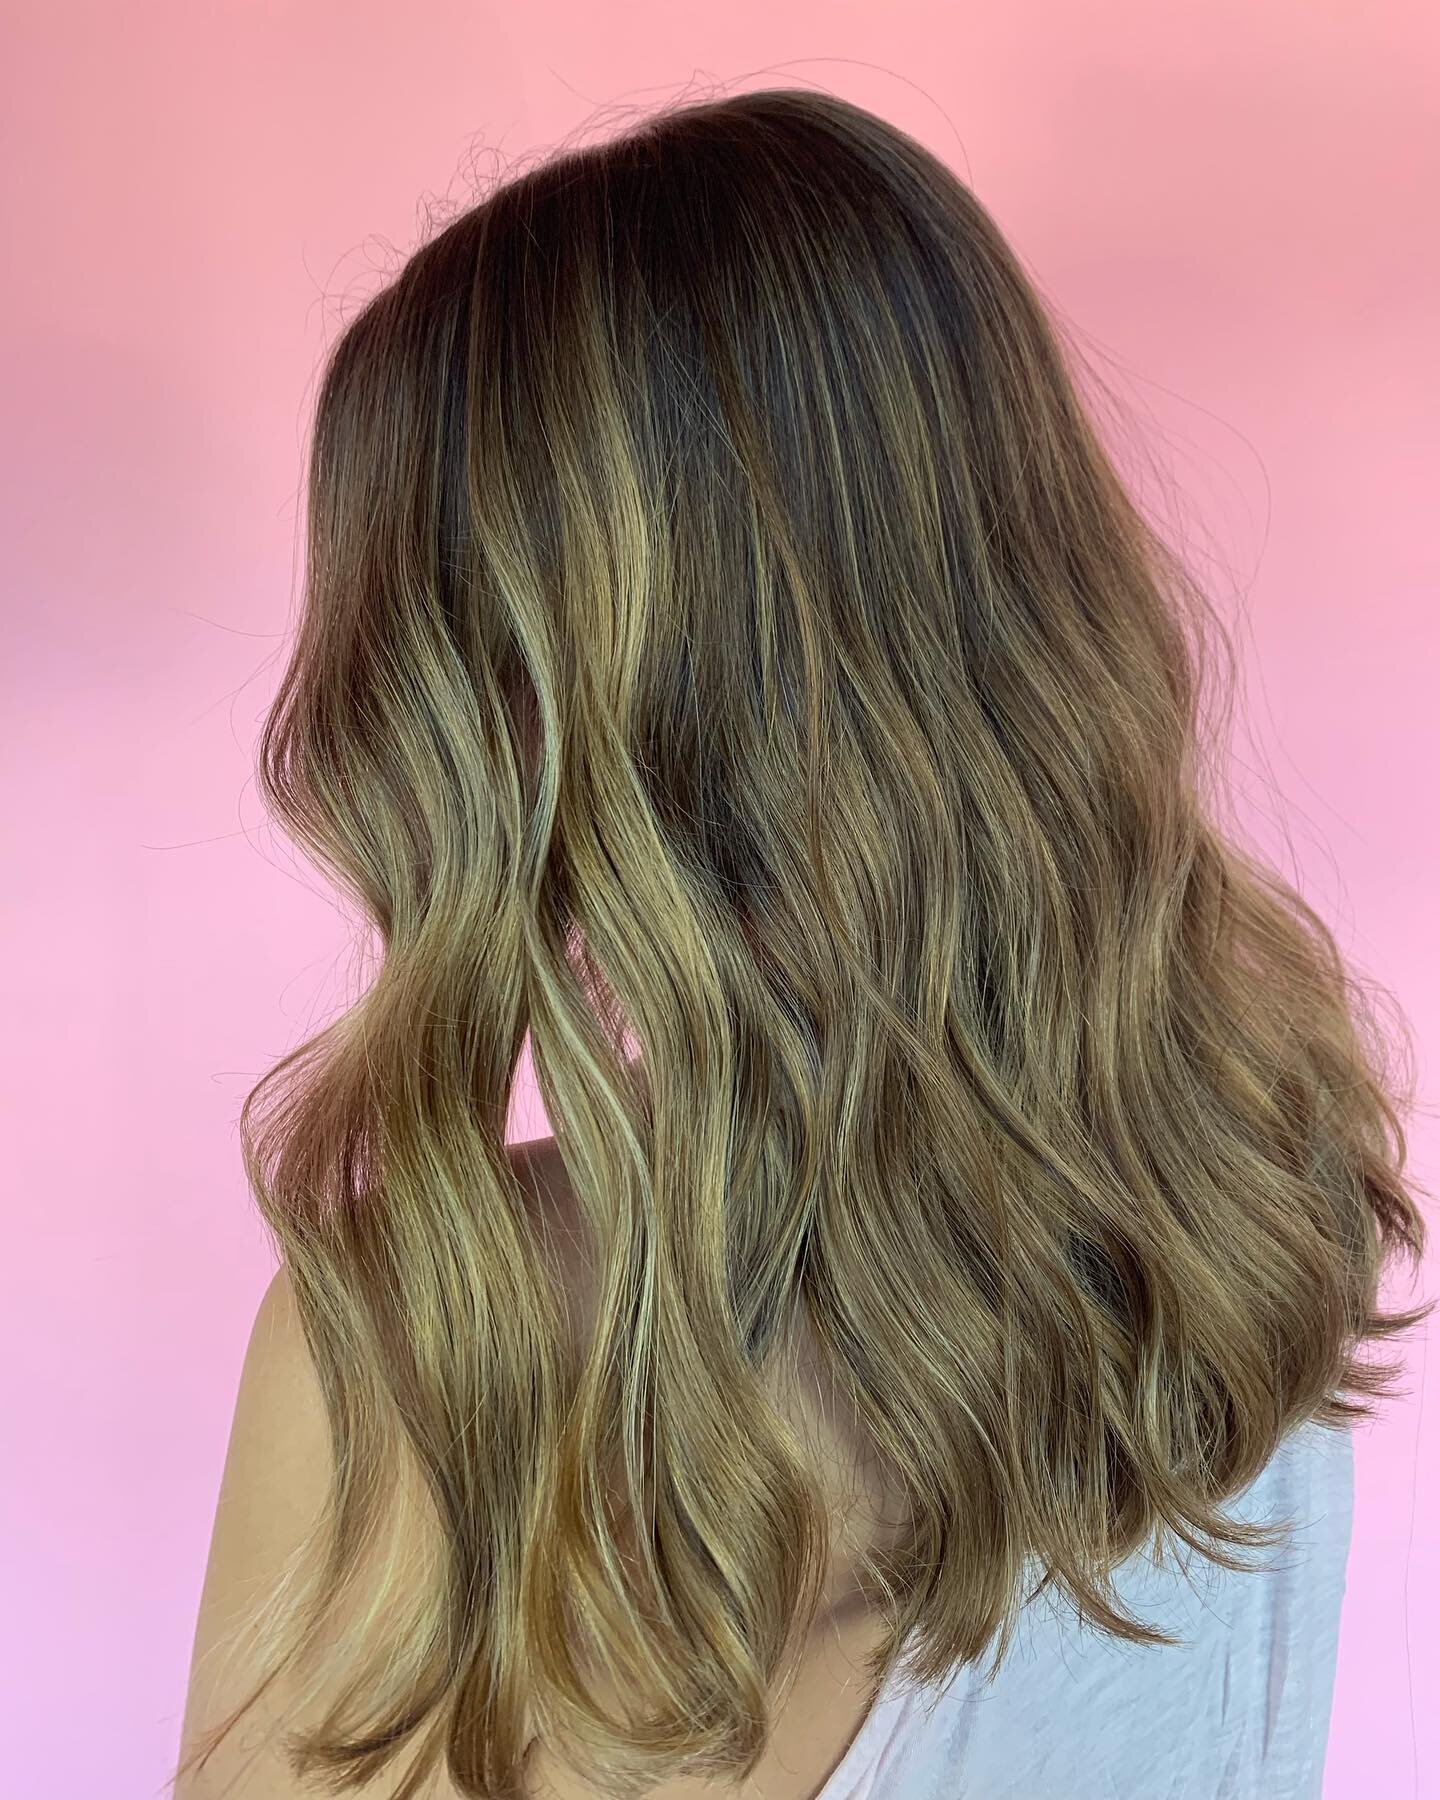 Balayage aren&rsquo;t just for blondes 🤎Balayage are great for those who don&rsquo;t want to keep up with lightening maintenance.  #hairstylist #stlhair #stlbalayage #balayage #brunette